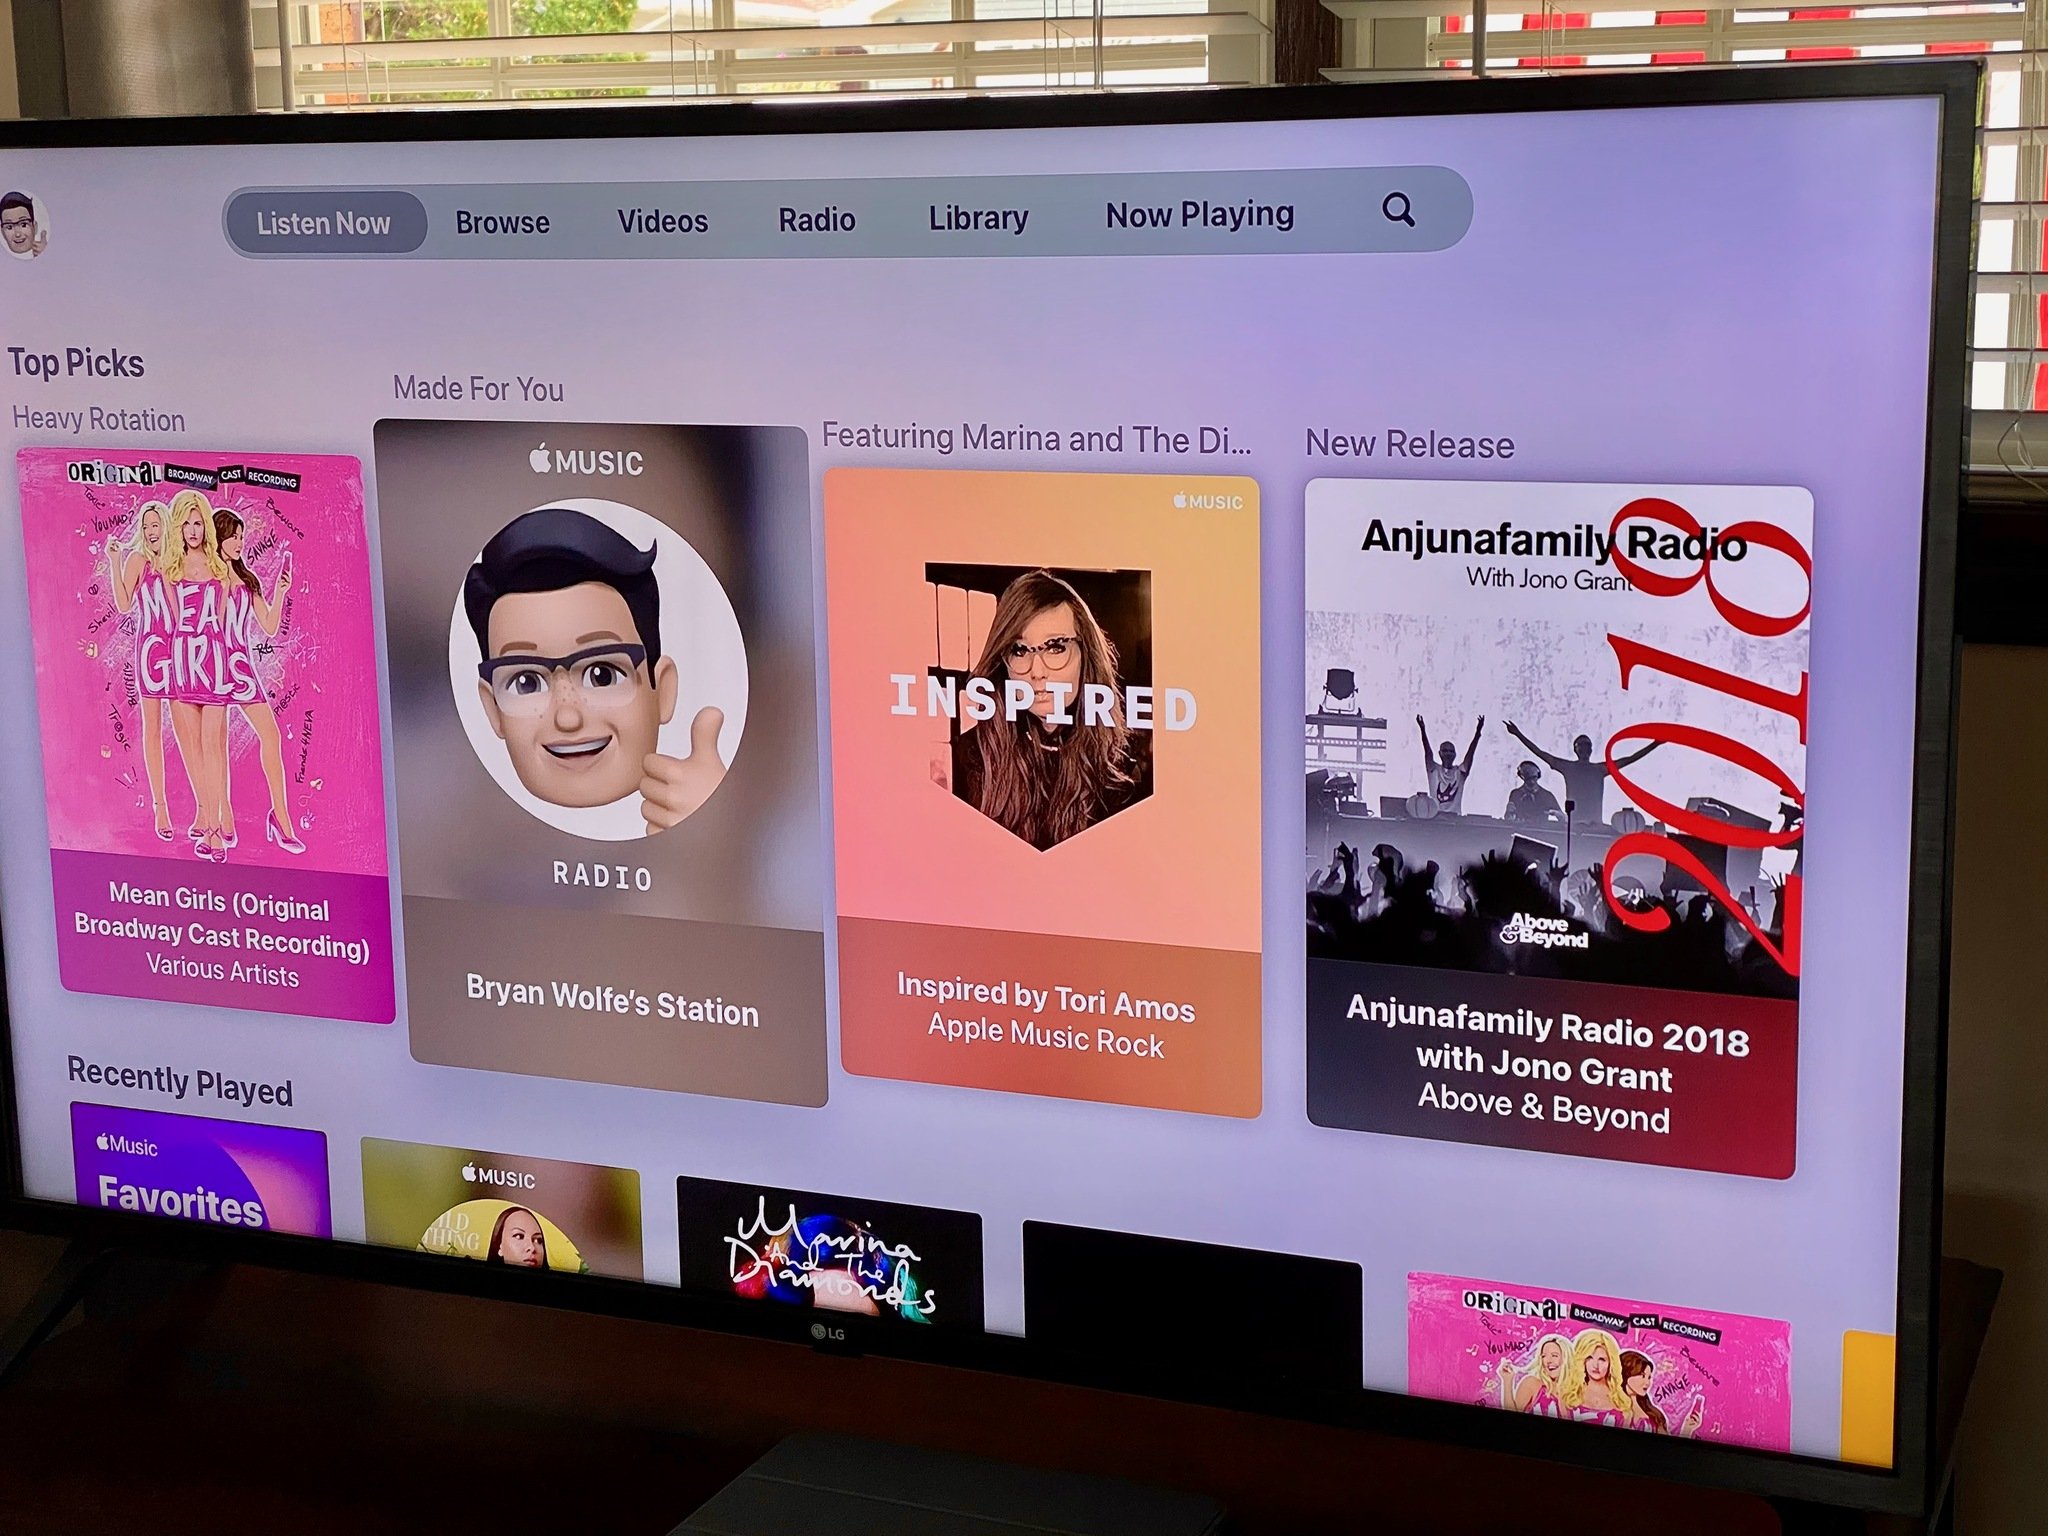 Accord Imidlertid Predictor LG smart TVs now have an Apple Music app | iMore